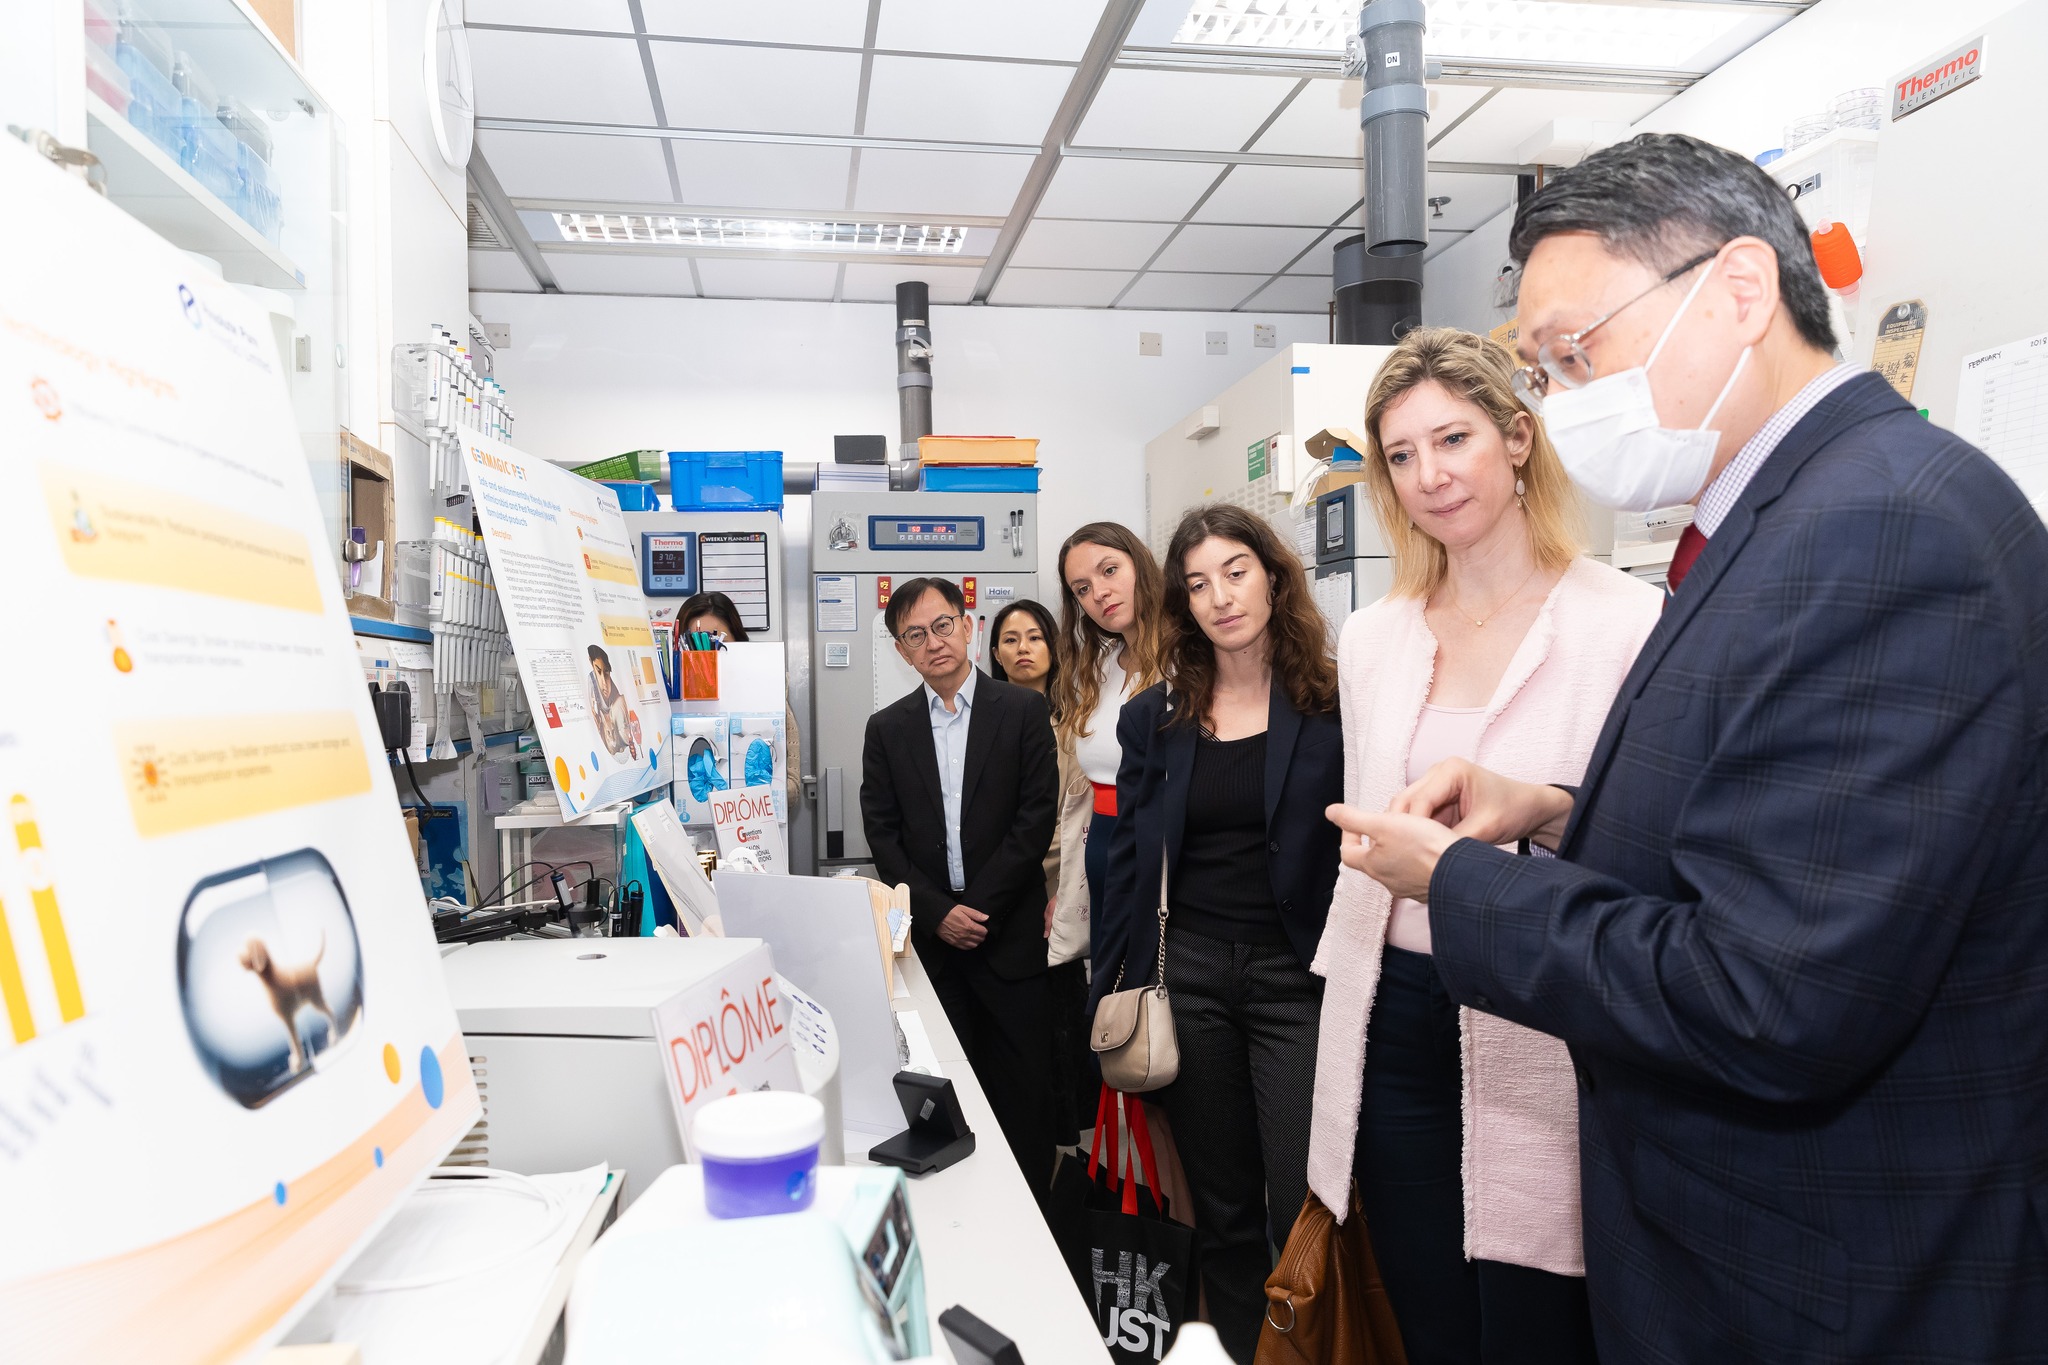 CG Drulhe (second right) and her delegation tour the HKUST Joint Laboratory on Health & Environmental Innovations, led by Director of France-HKUST Innovation Hub Prof. YEUNG King Lun (first right).